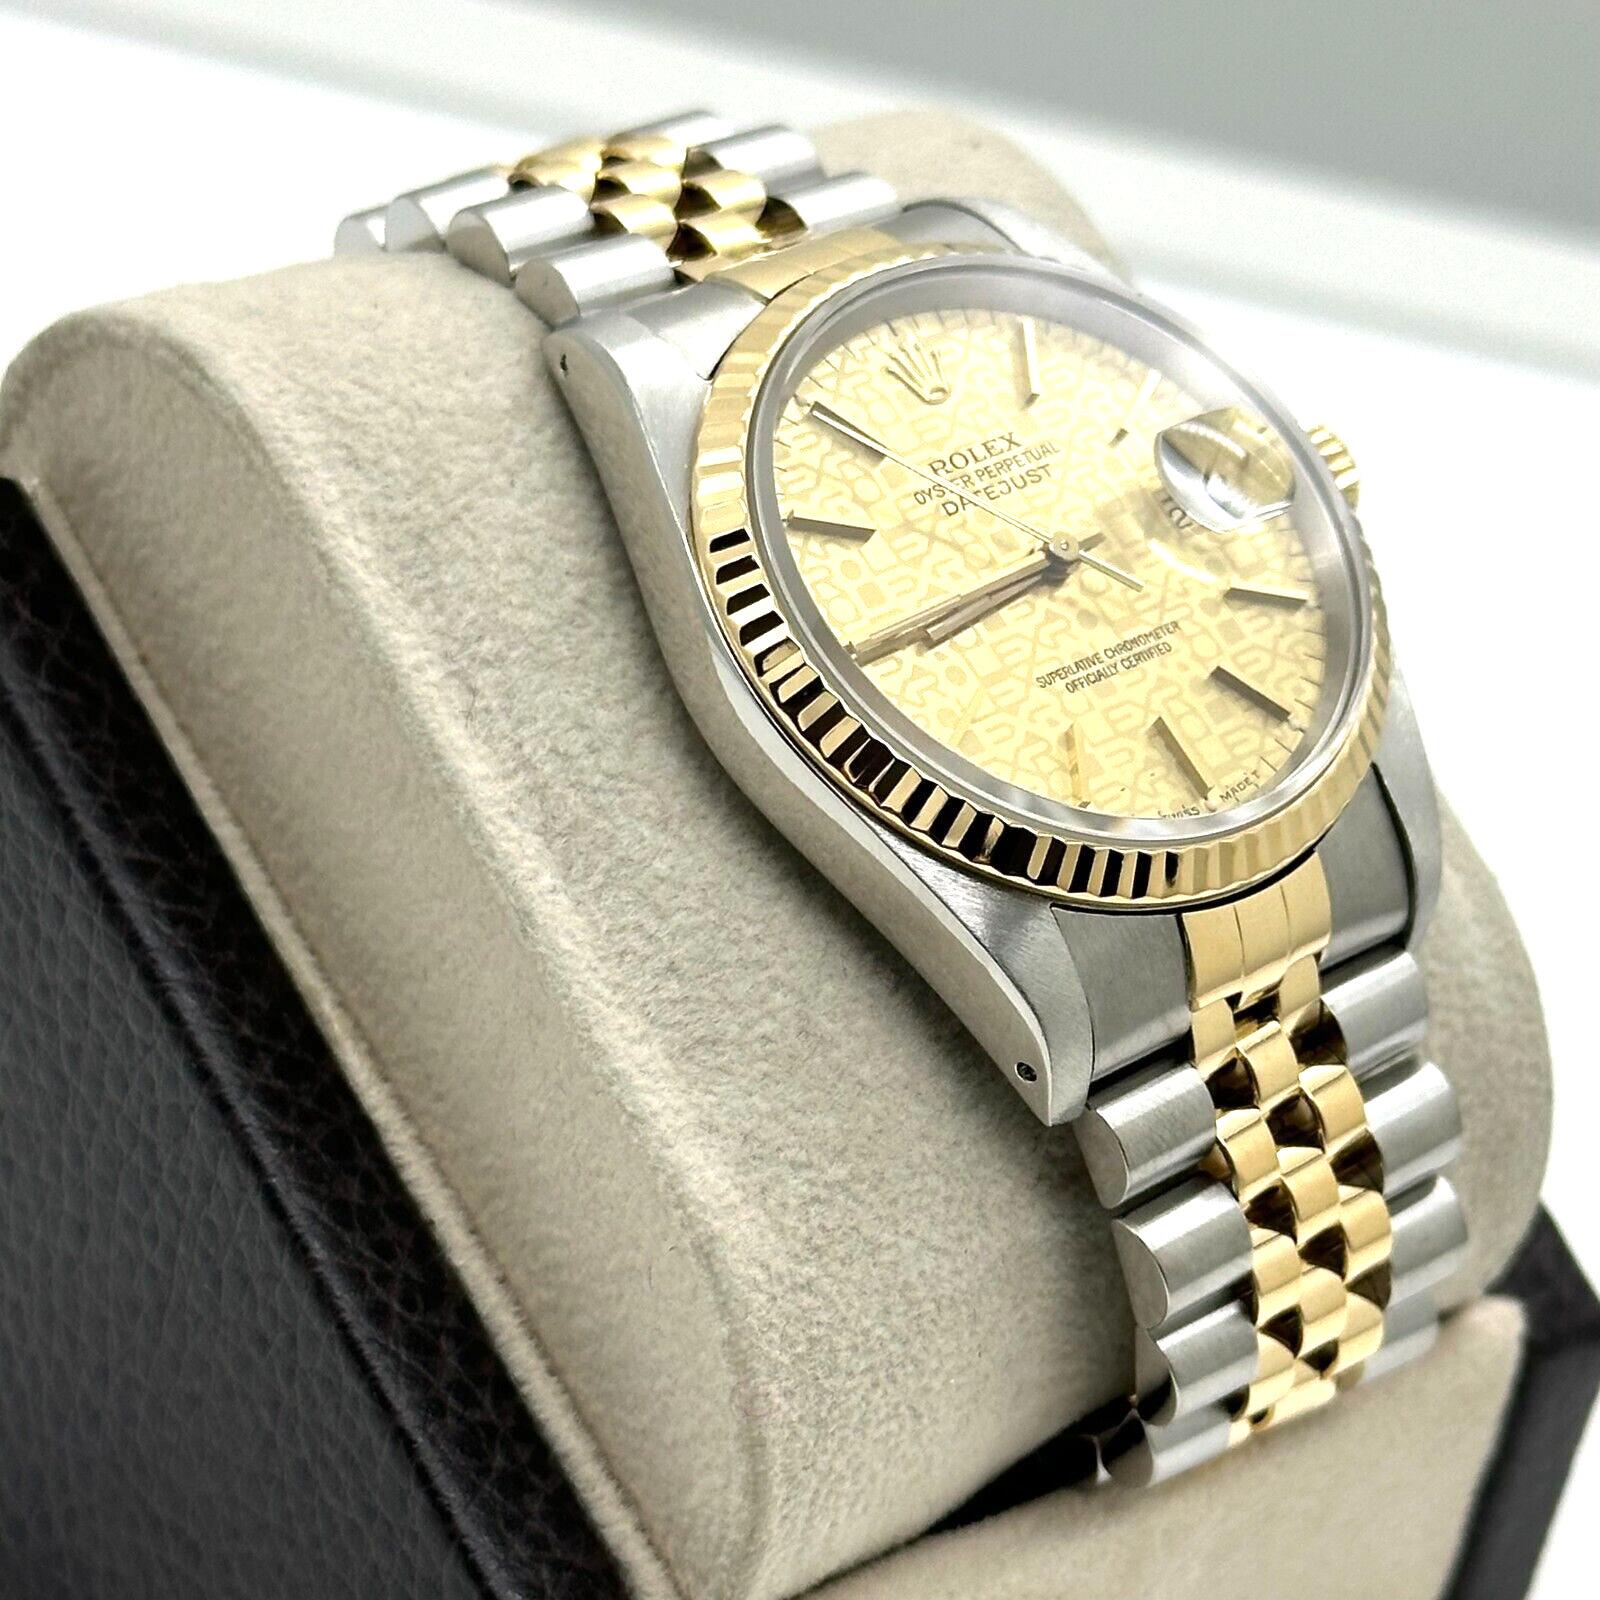 Rolex Datejust 16233 Jubilee Dial 18K Yellow Gold Stainless Steel In Excellent Condition For Sale In San Diego, CA